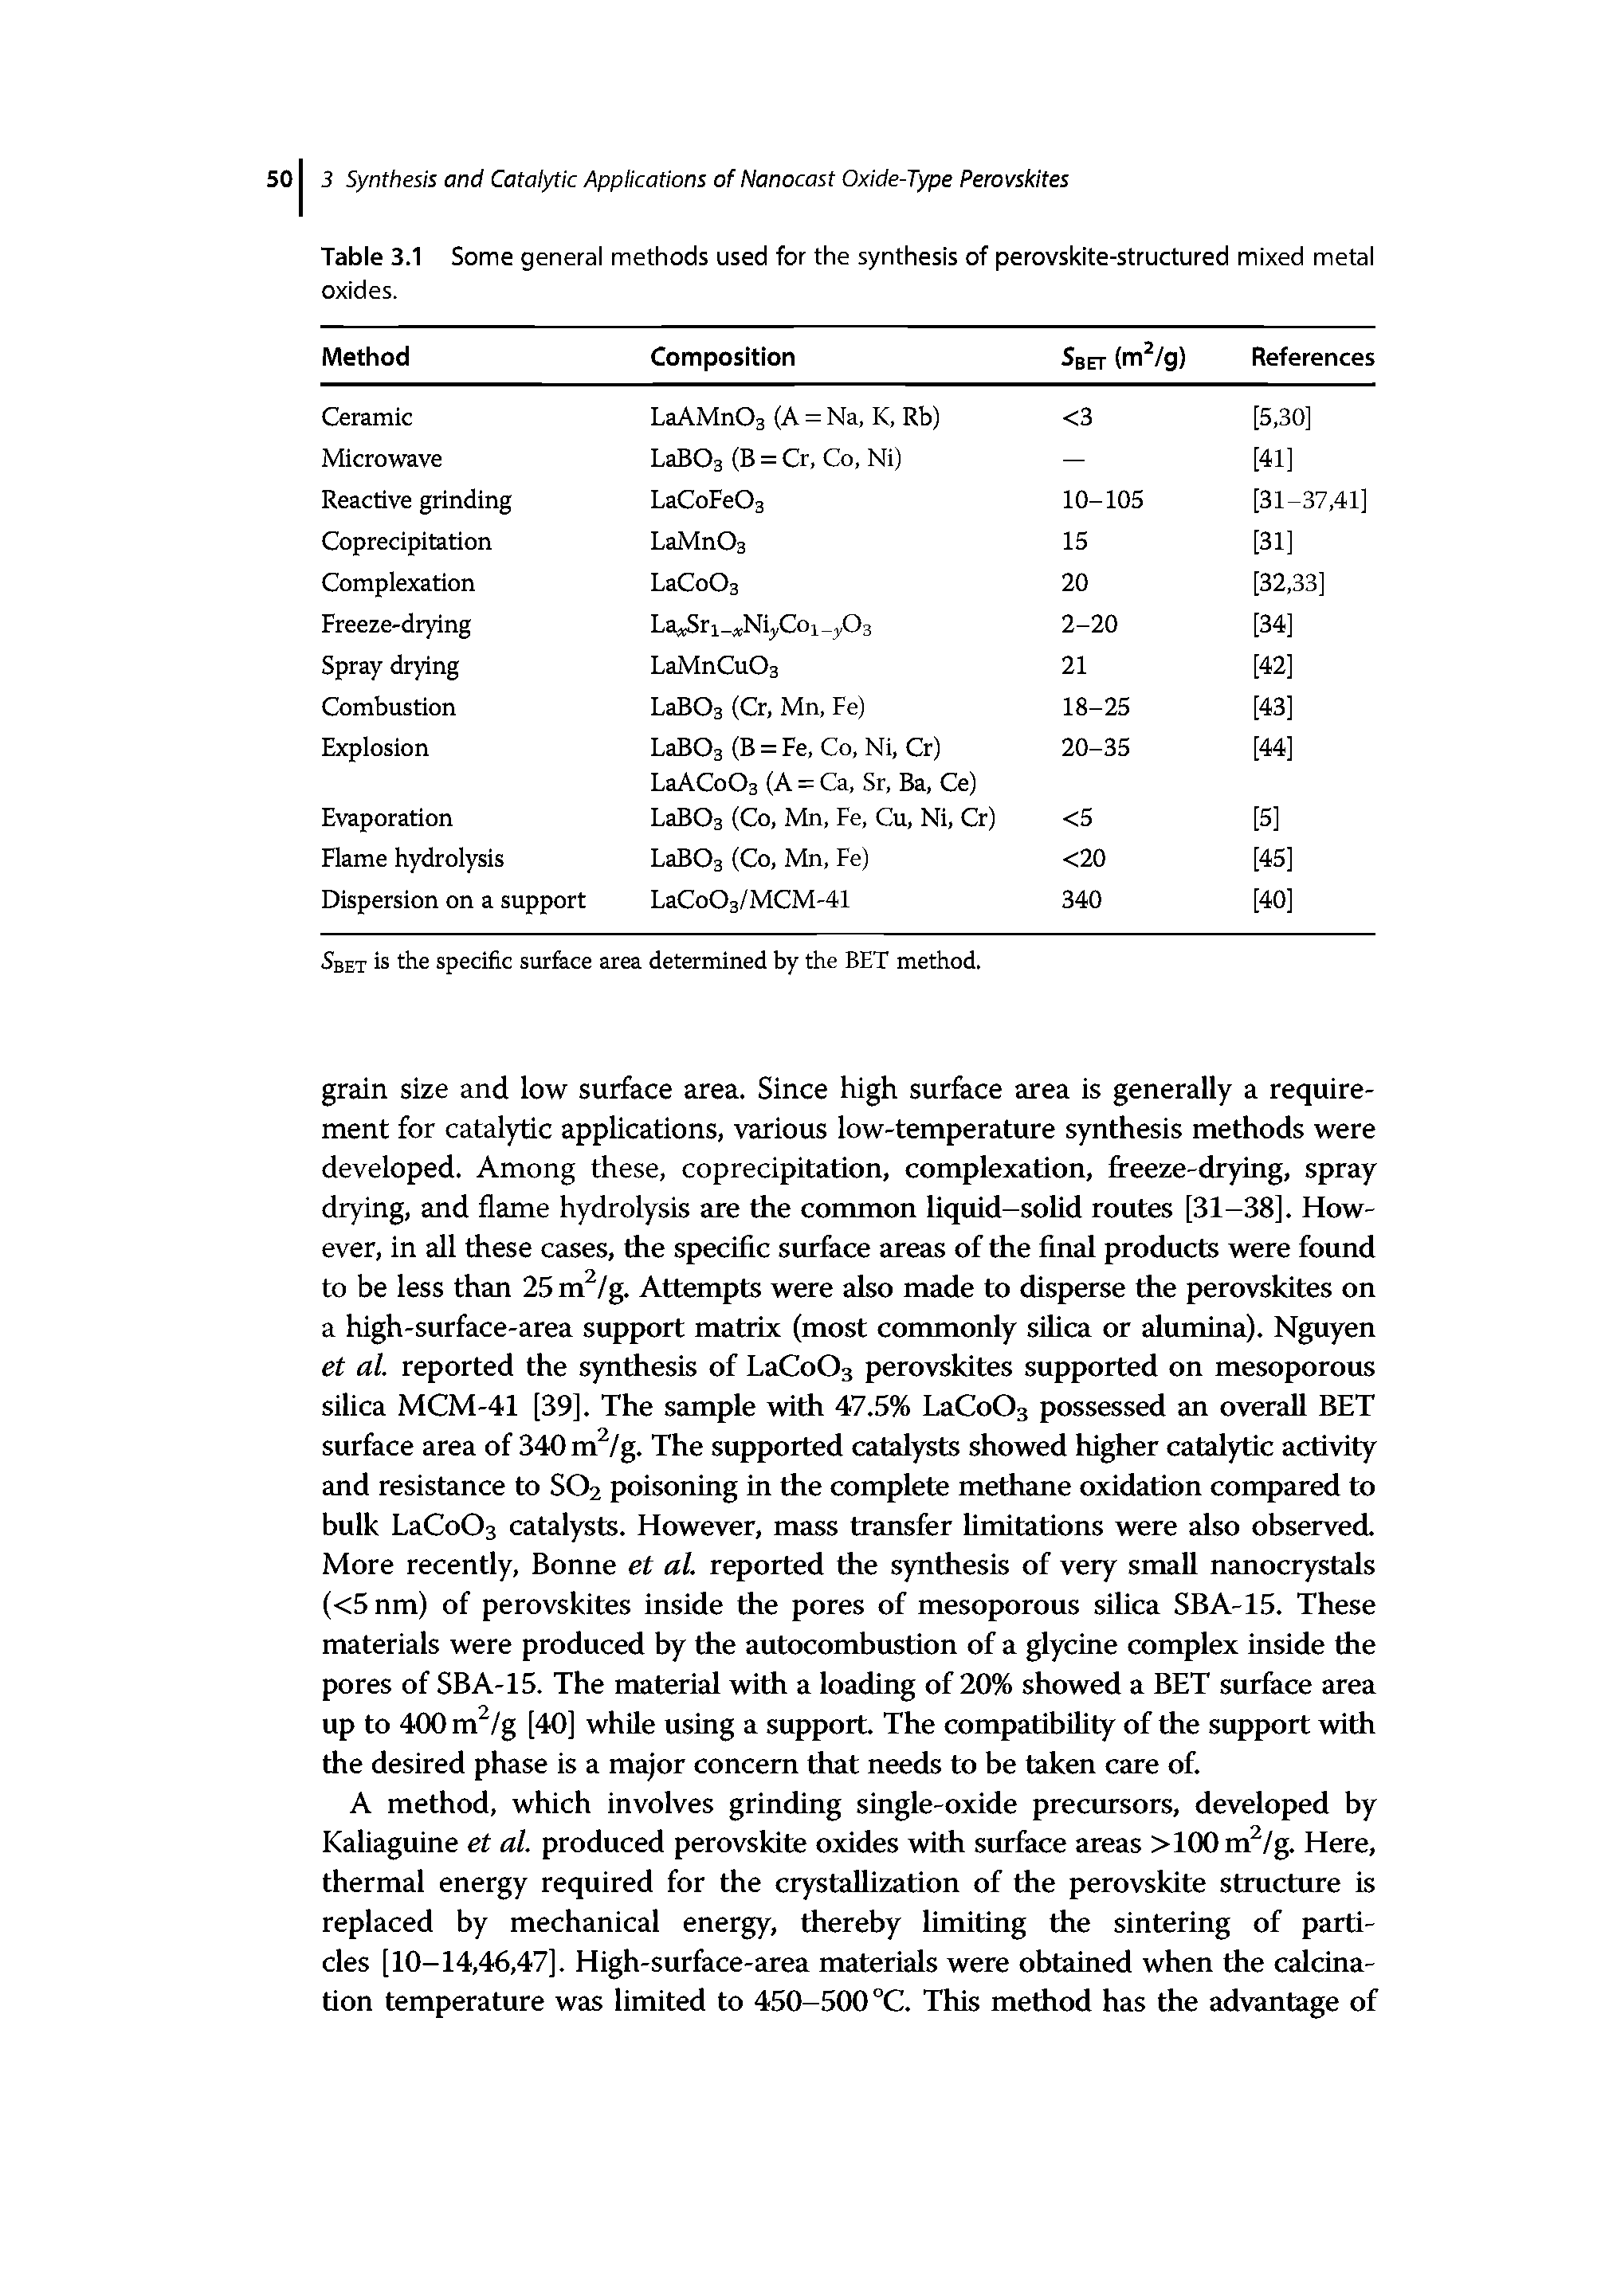 Table 3.1 Some general methods used for the synthesis of perovskite-structured mixed metal oxides.